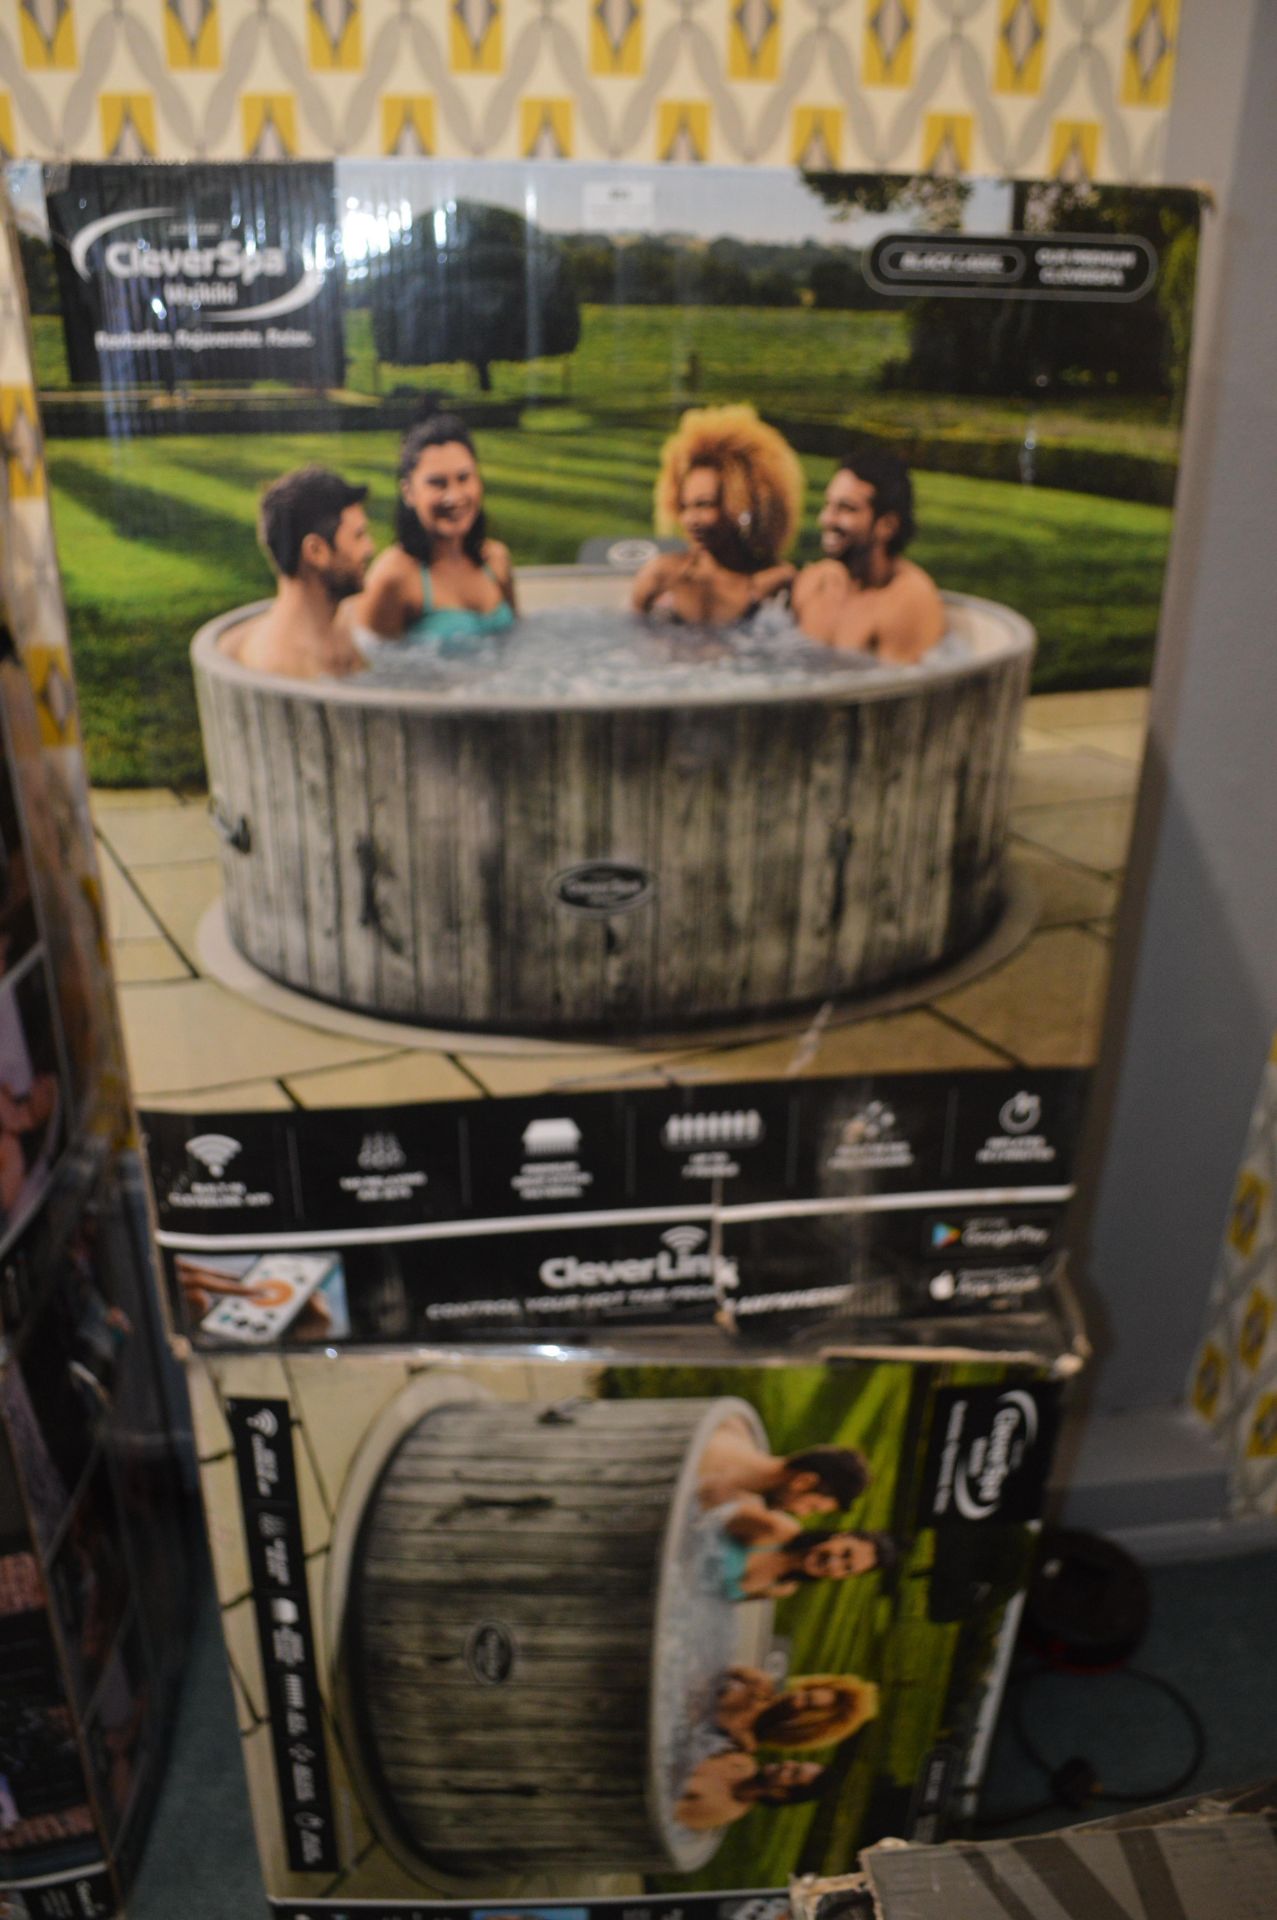 *Two Clever Spa Waikiki Inflatable Hot Tubs